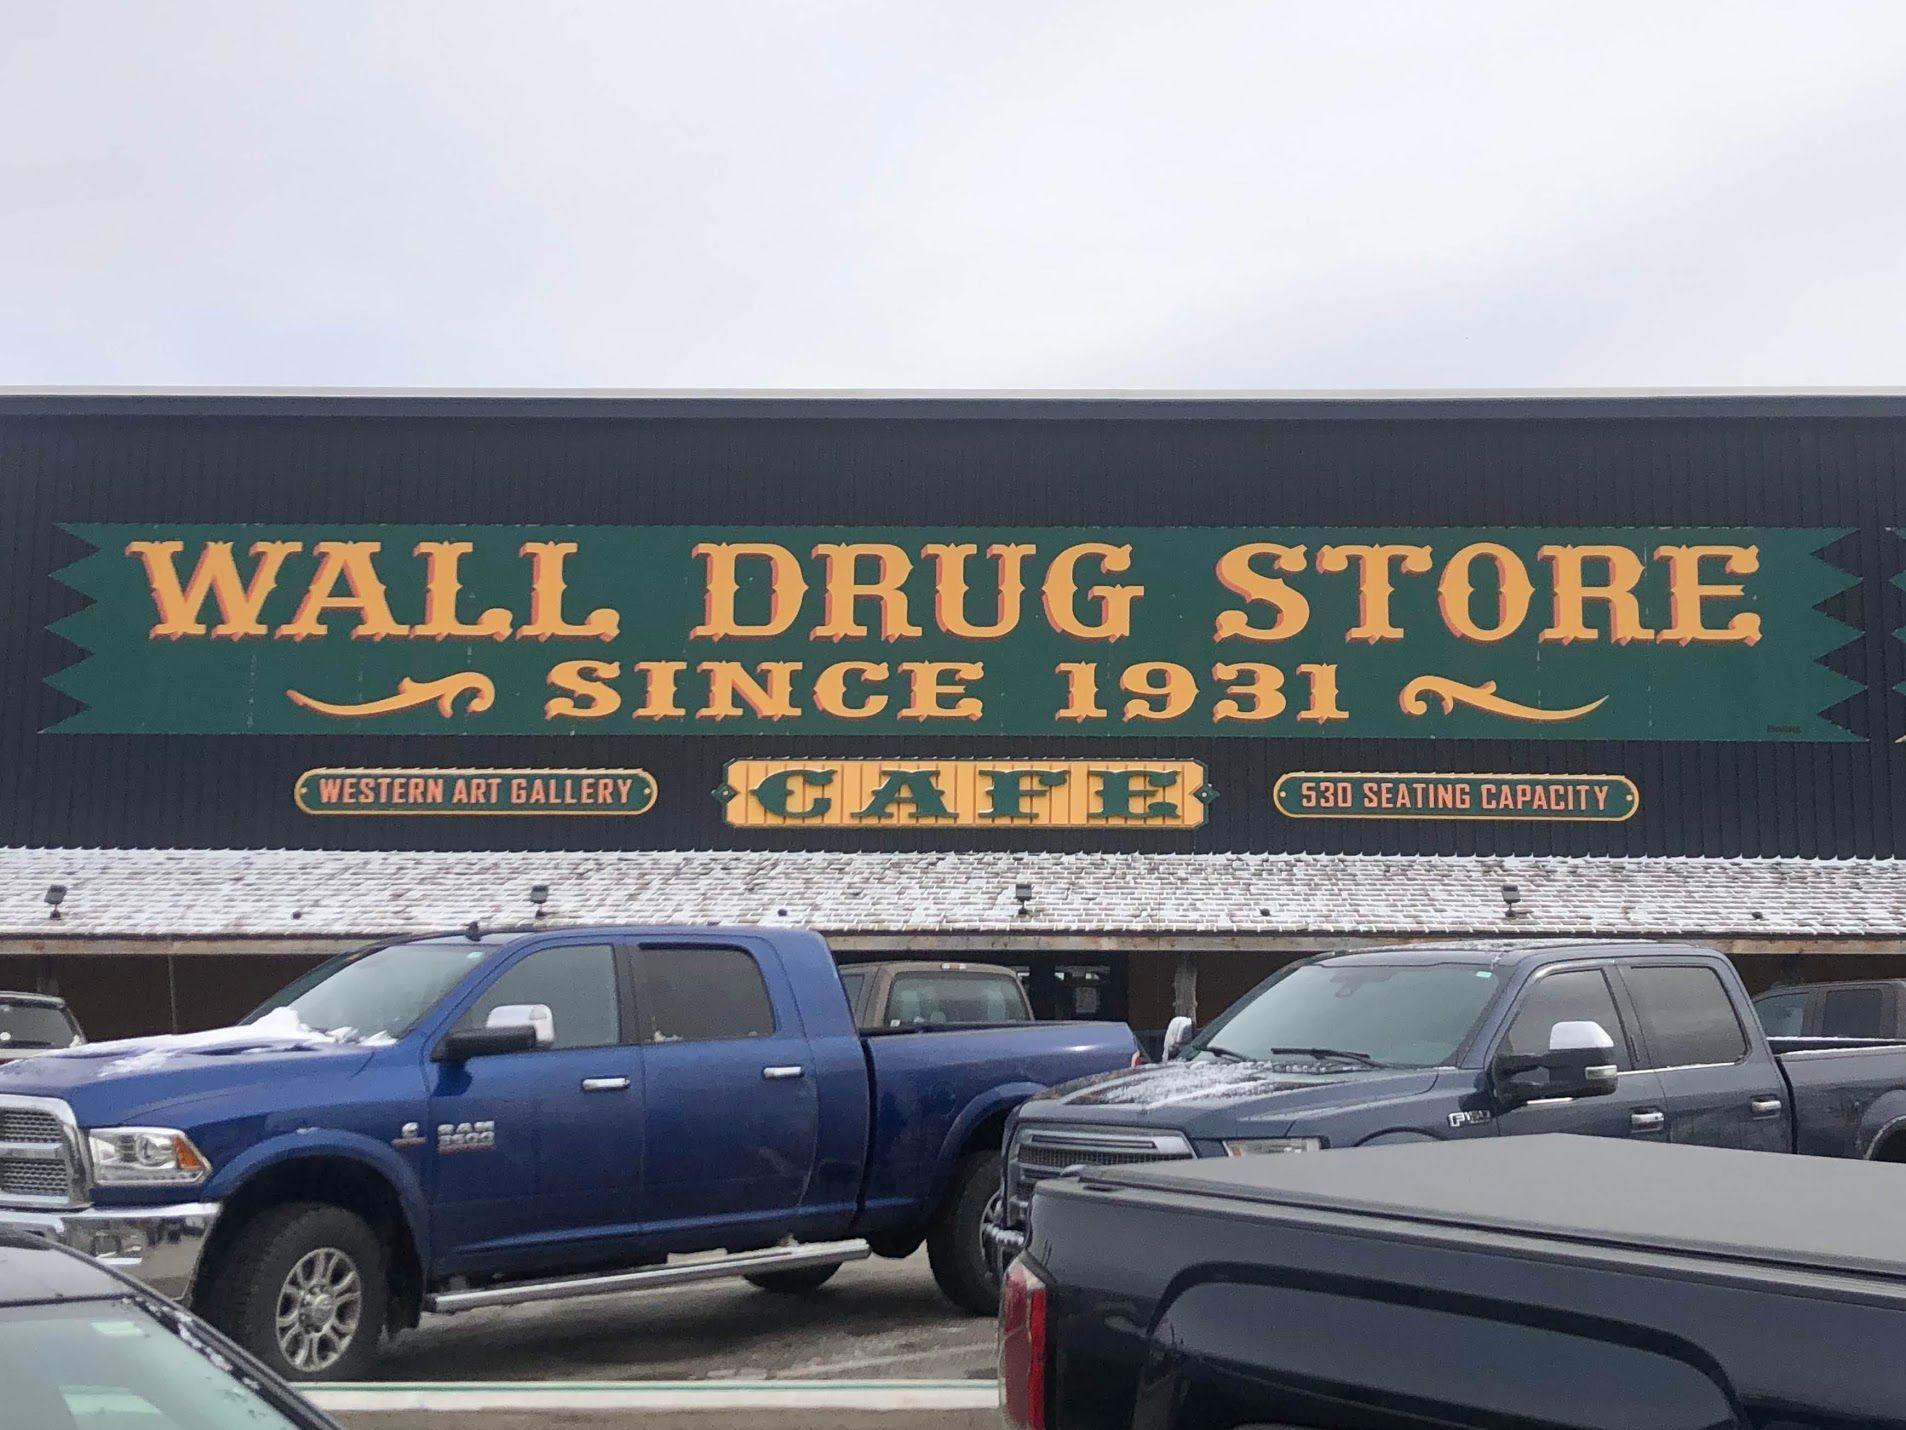 The exterior of Wall Drug Store. The sign reads 'Wall Drug Store, Since 1931, Western Art Gallery, Cafe, 530 Seating Capacity'